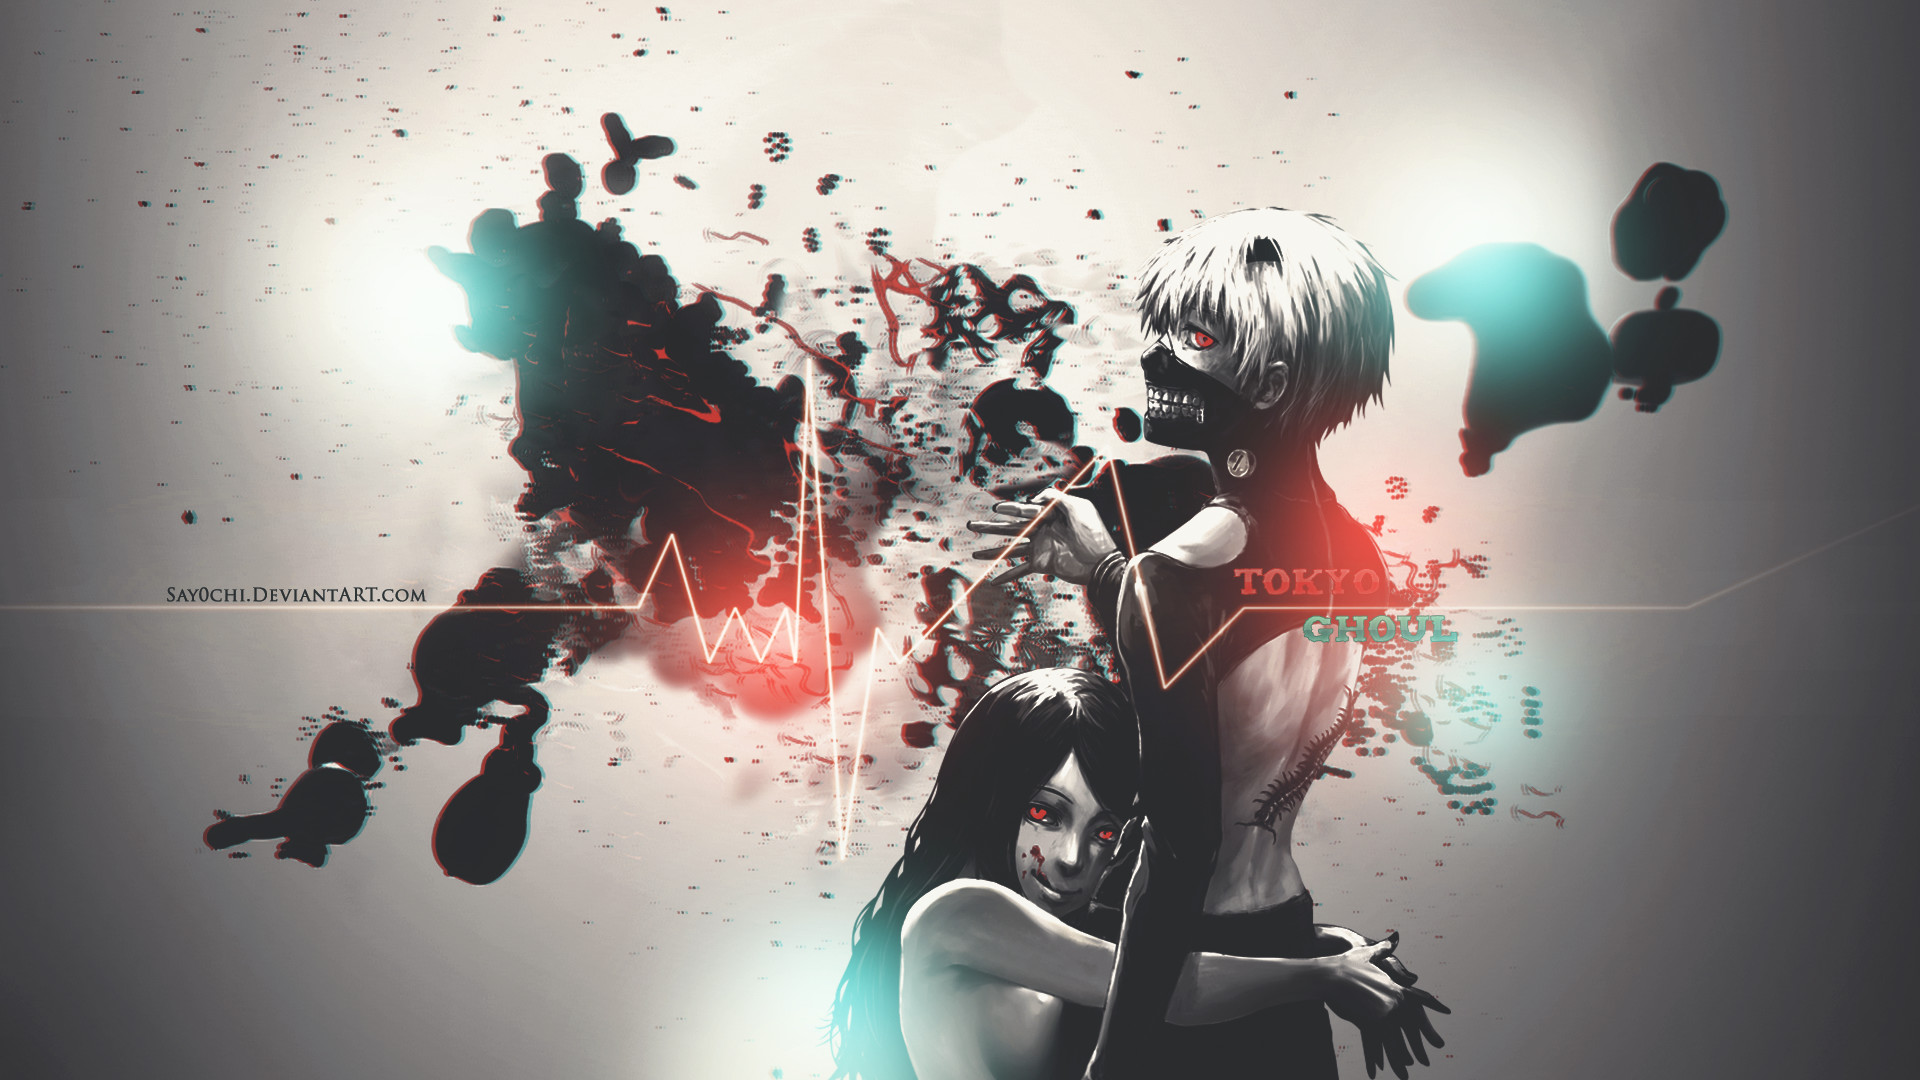 Tokyo Ghoul Wallpaper 1920 x 1080 HD by Say0chi